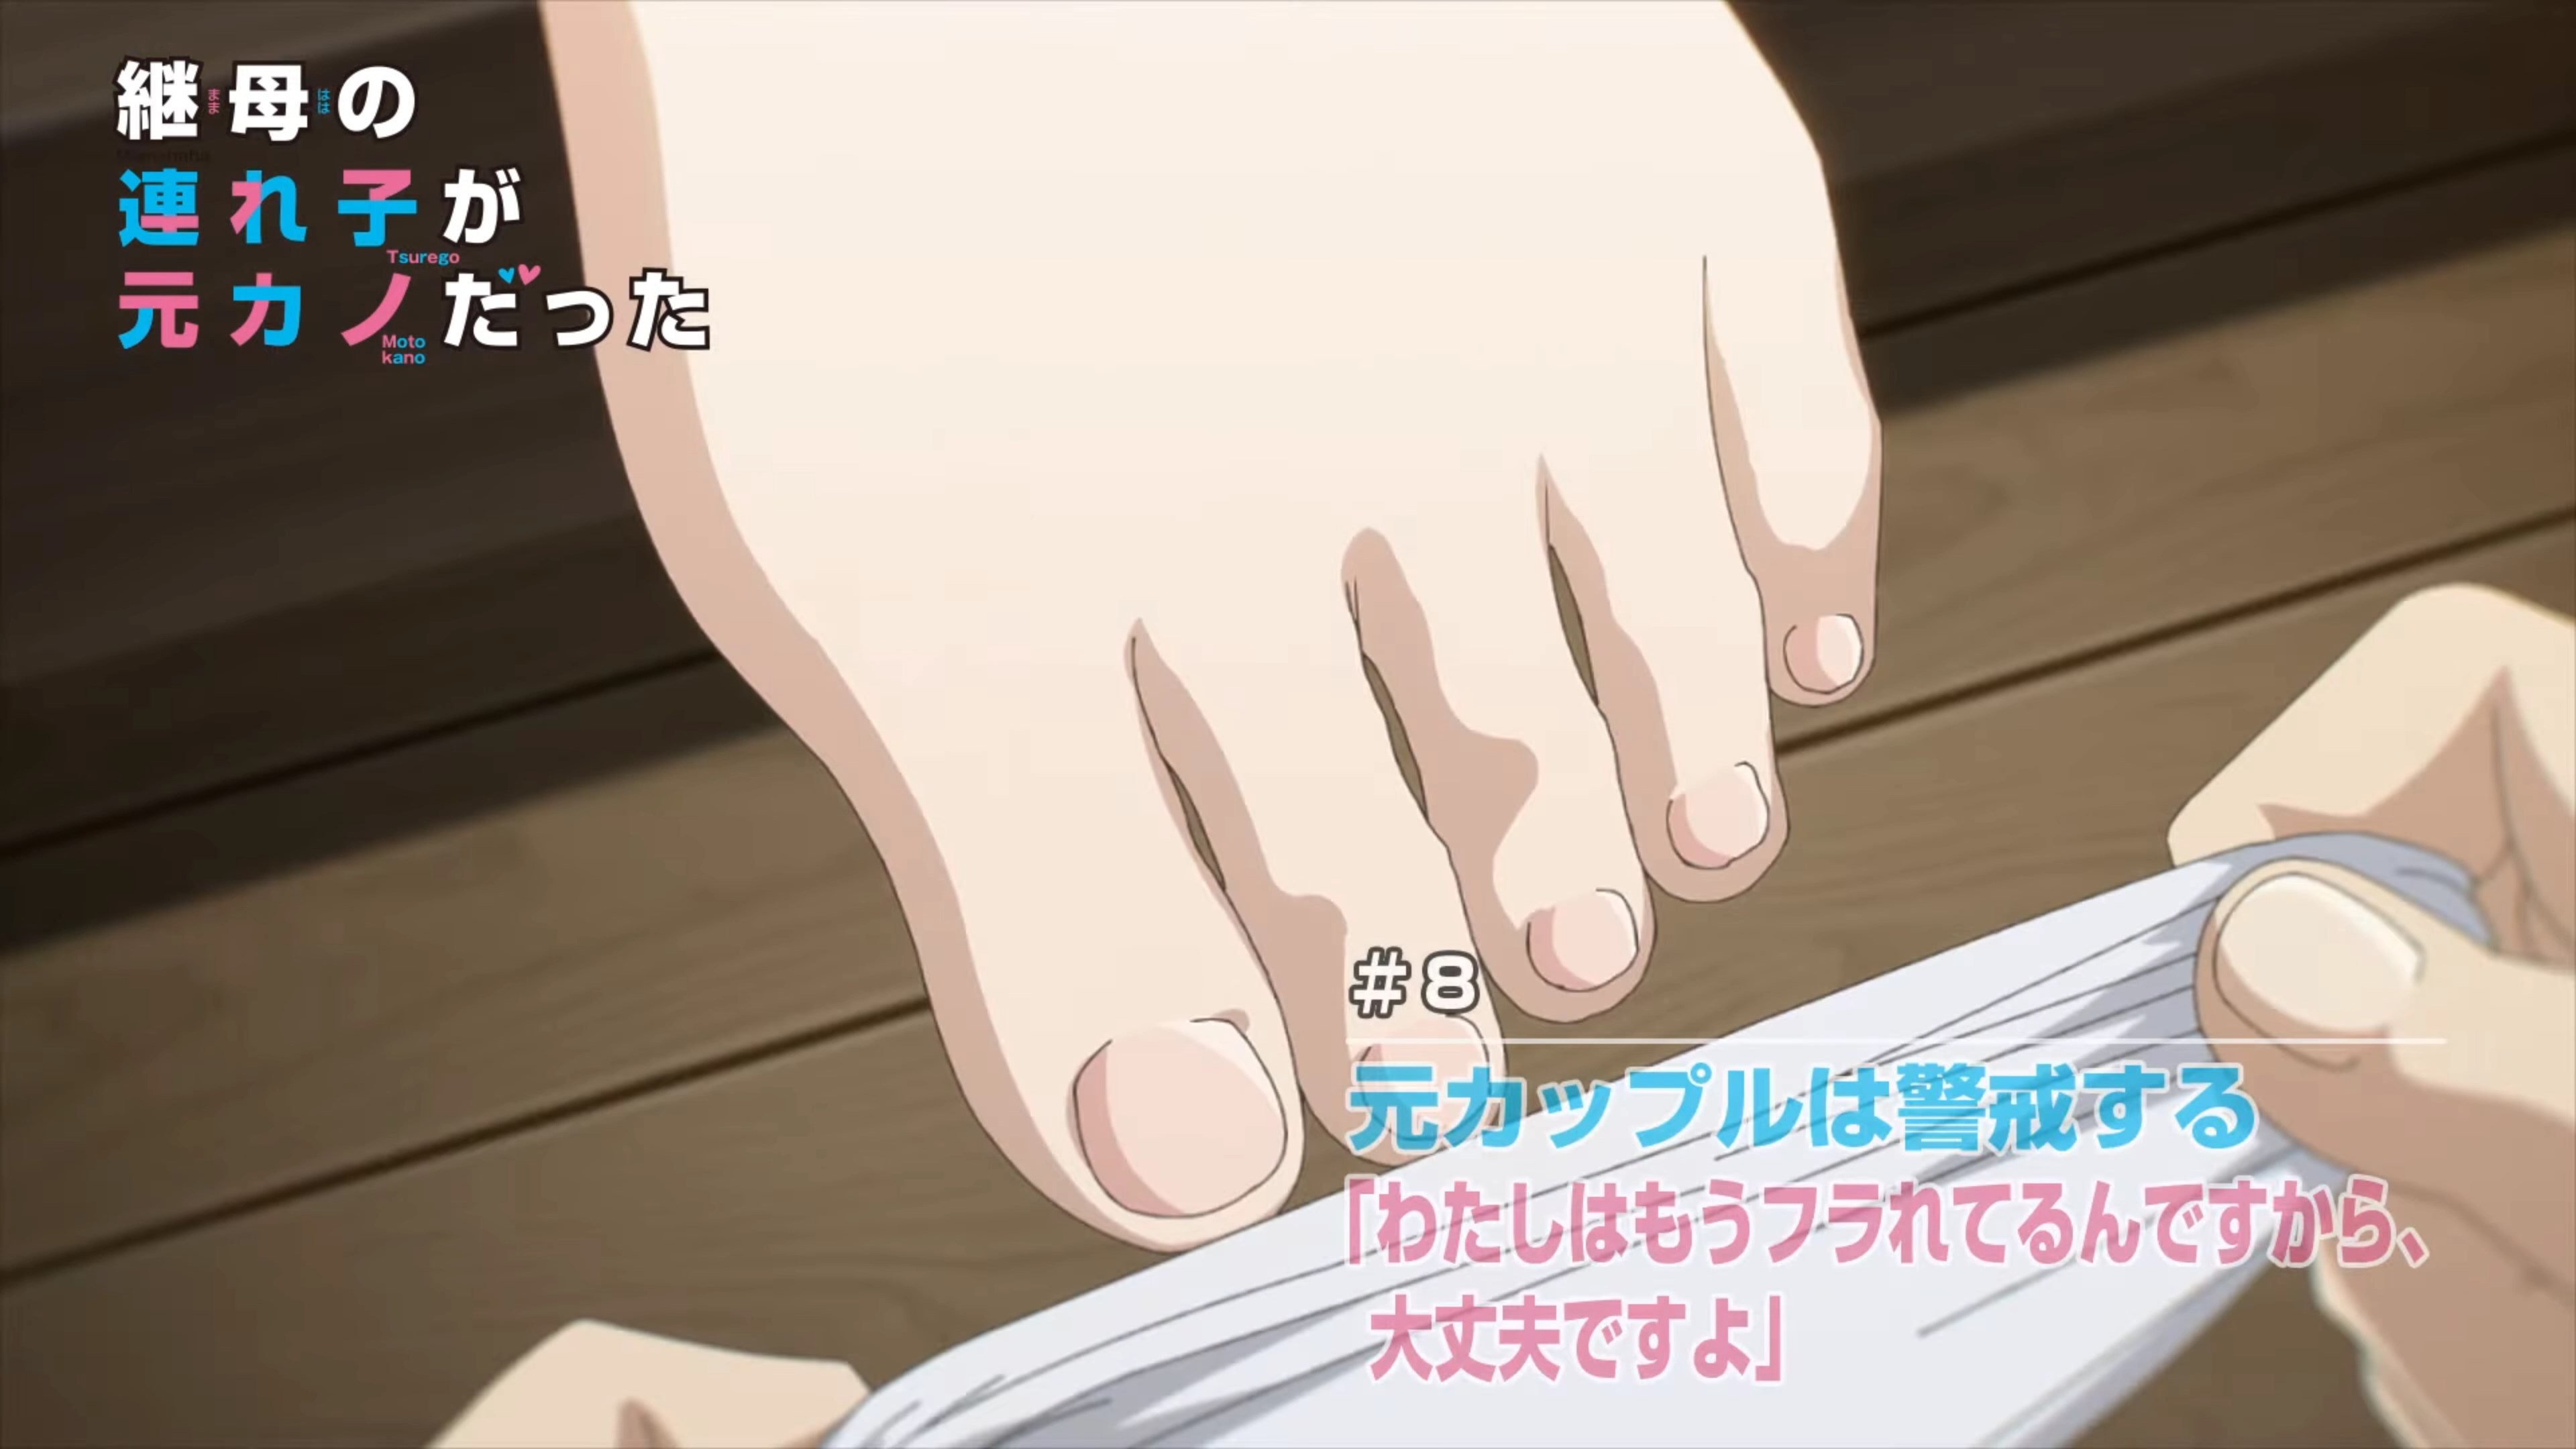 SerasKF on X: #anifeets Feet shots from today's episodes. 1-2